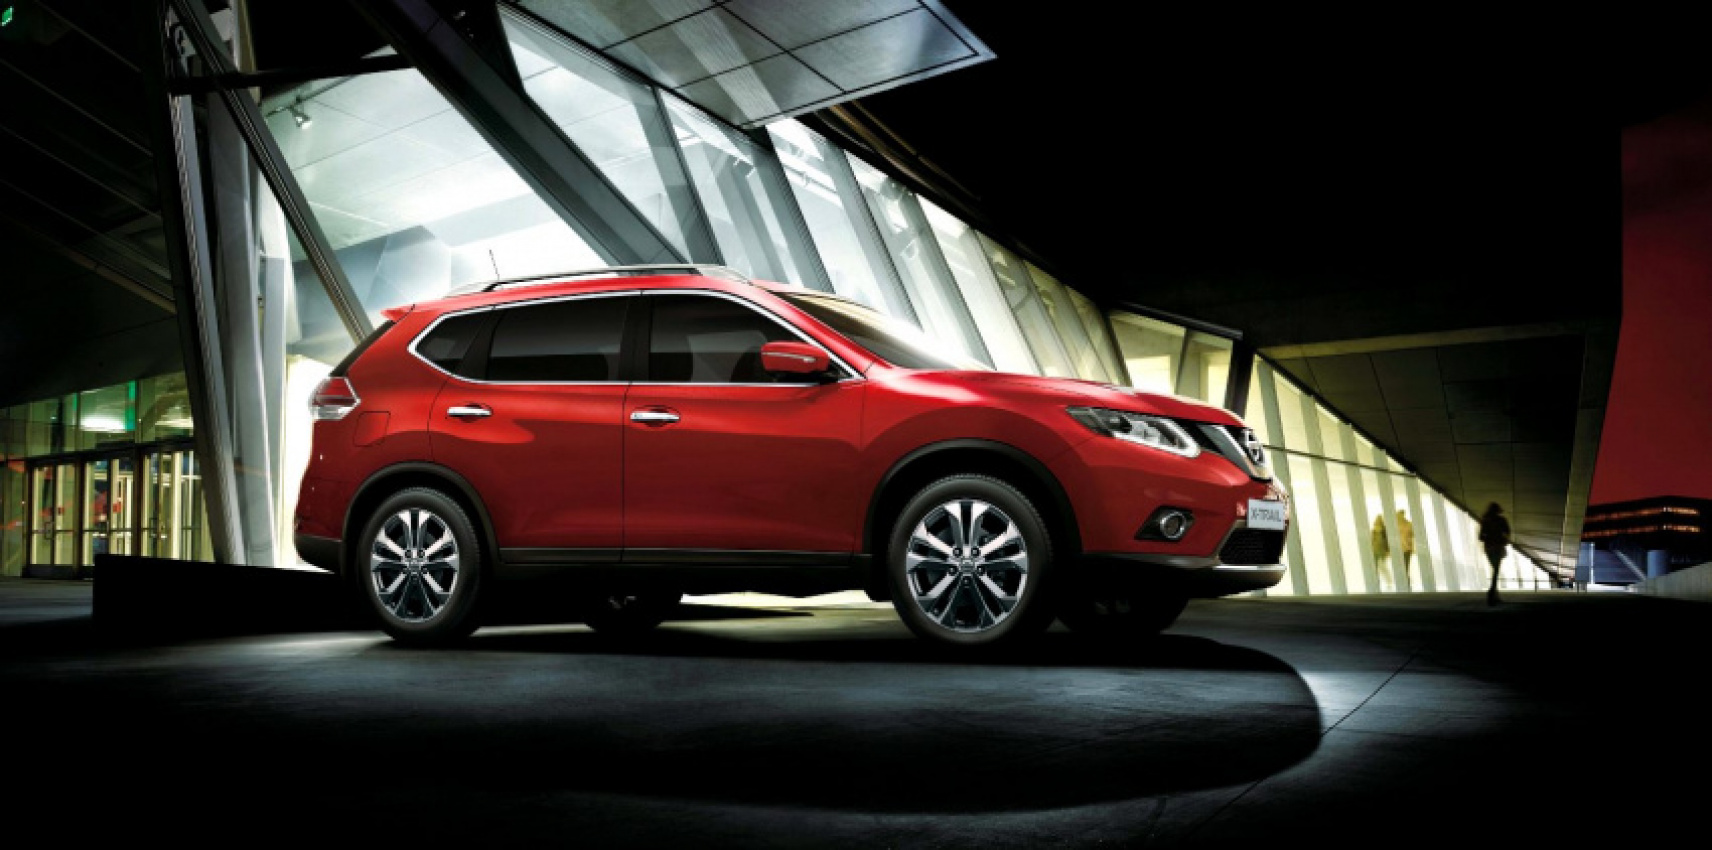 autos, car brands, cars, nissan, nissan x-trail, nissan x-trail now available in flaming red